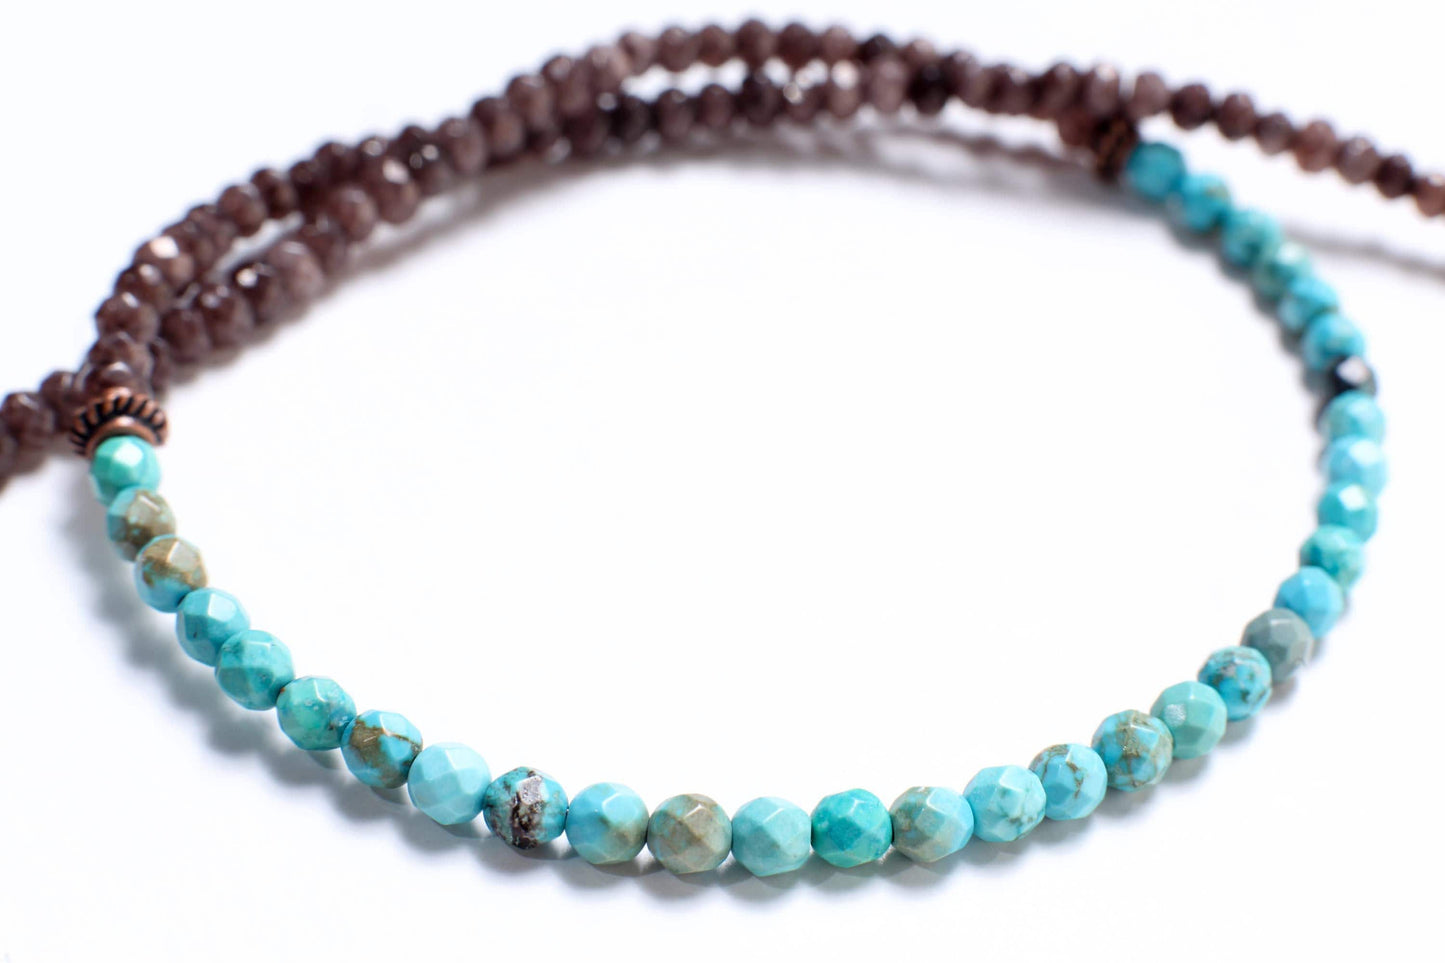 Genuine Blue Turquoise 4mm Faceted Round, Coffee Quartz Rondelle Choker Hand Made Necklace, December Birth Stone, Man and Woman Jewelry